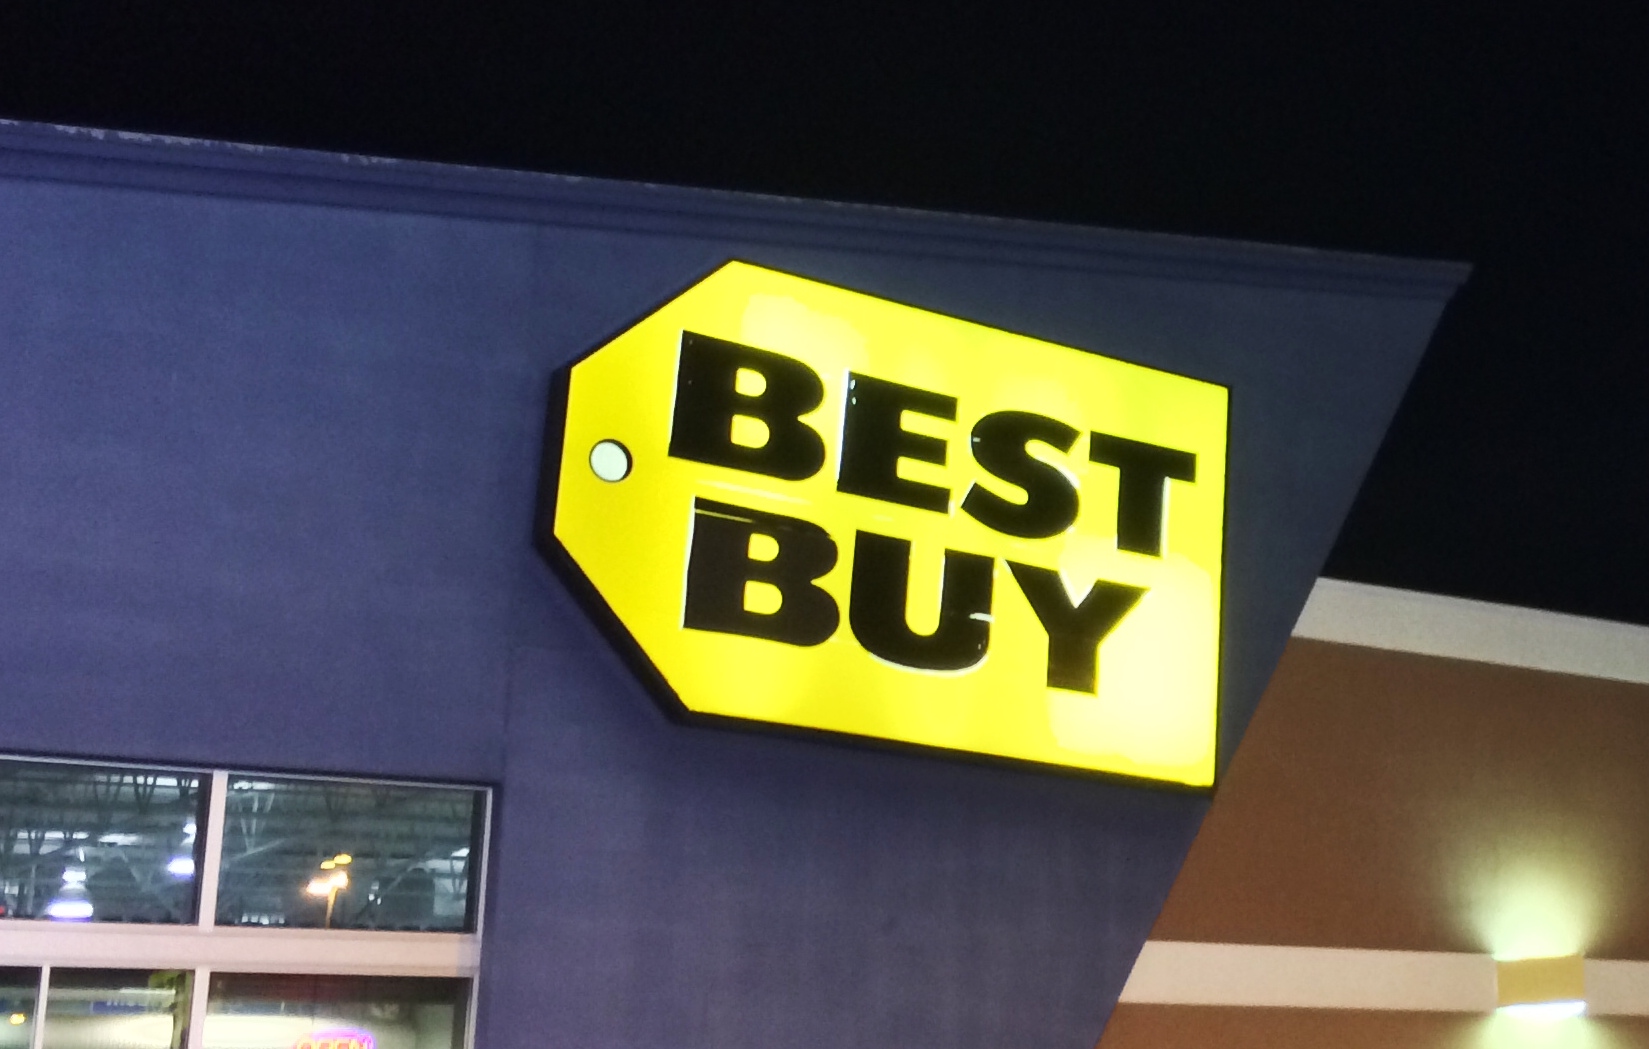 Check Best Buy today and Sunday to find a PS4 in stock quicker.